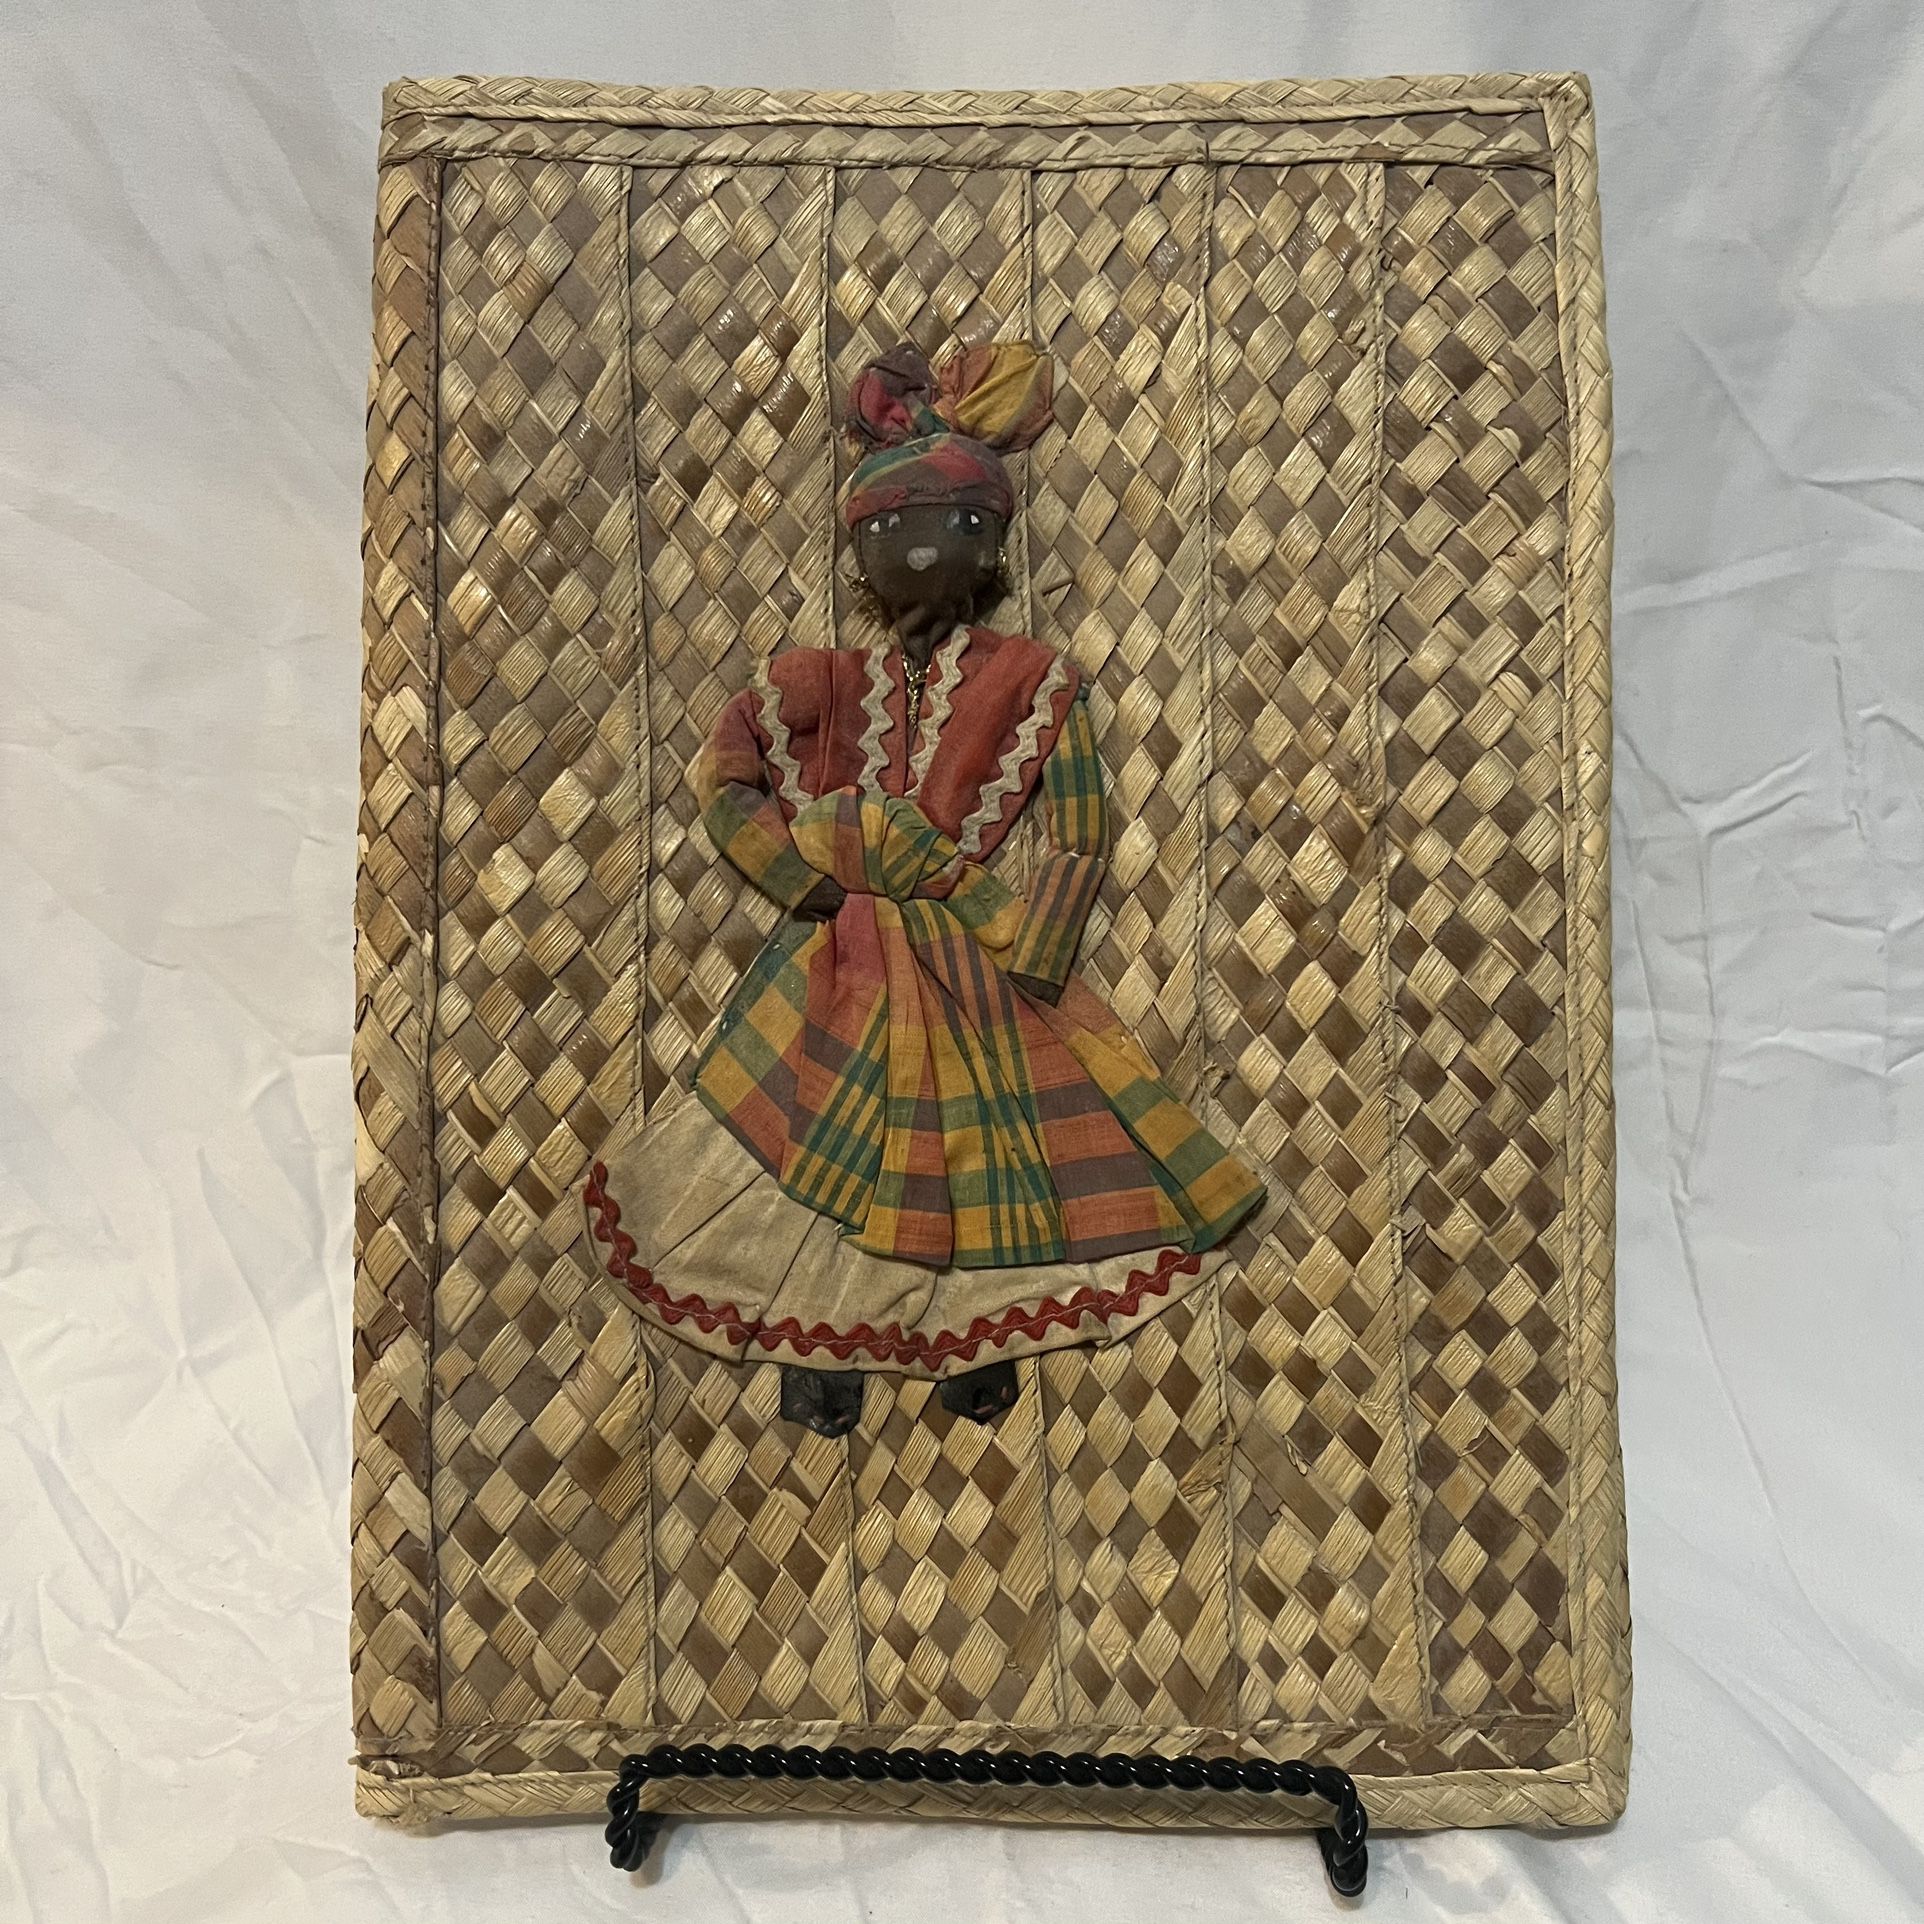 Raffia and Straw Woven Book Cover with Doll Attached